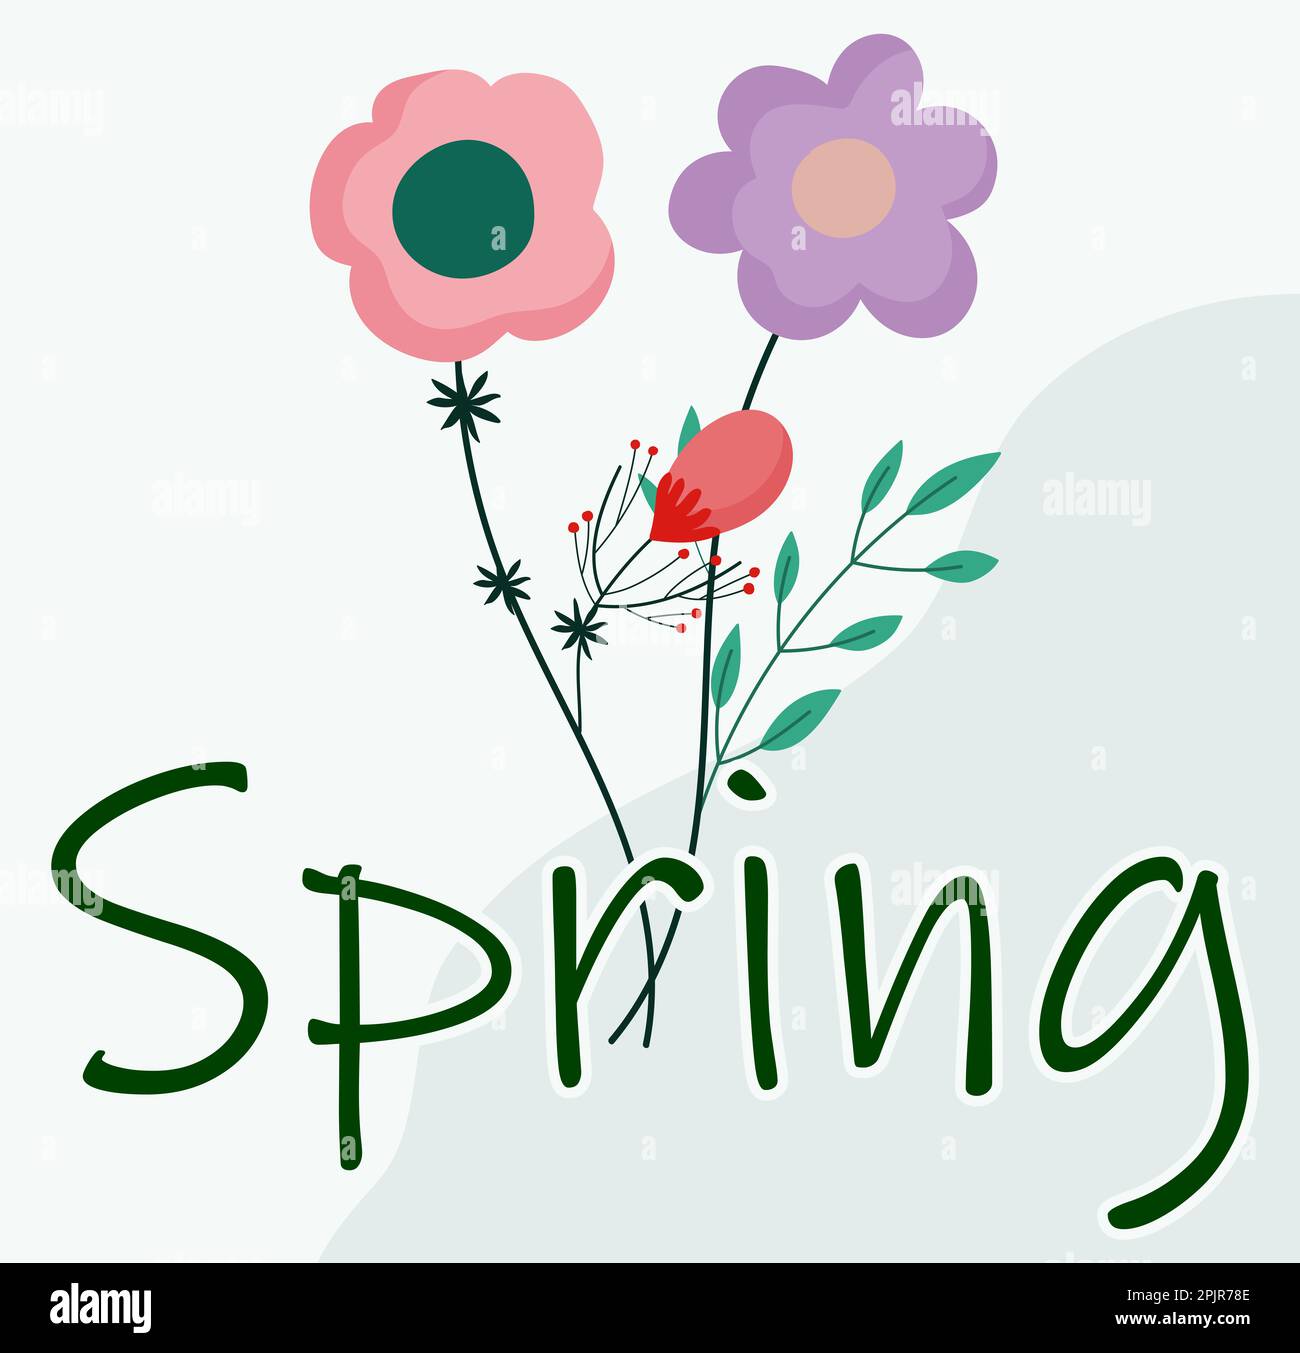 two flowers and the word spring, spring season card, purple flower and orange flower with green leaves, spring flowers minimalist style Stock Photo